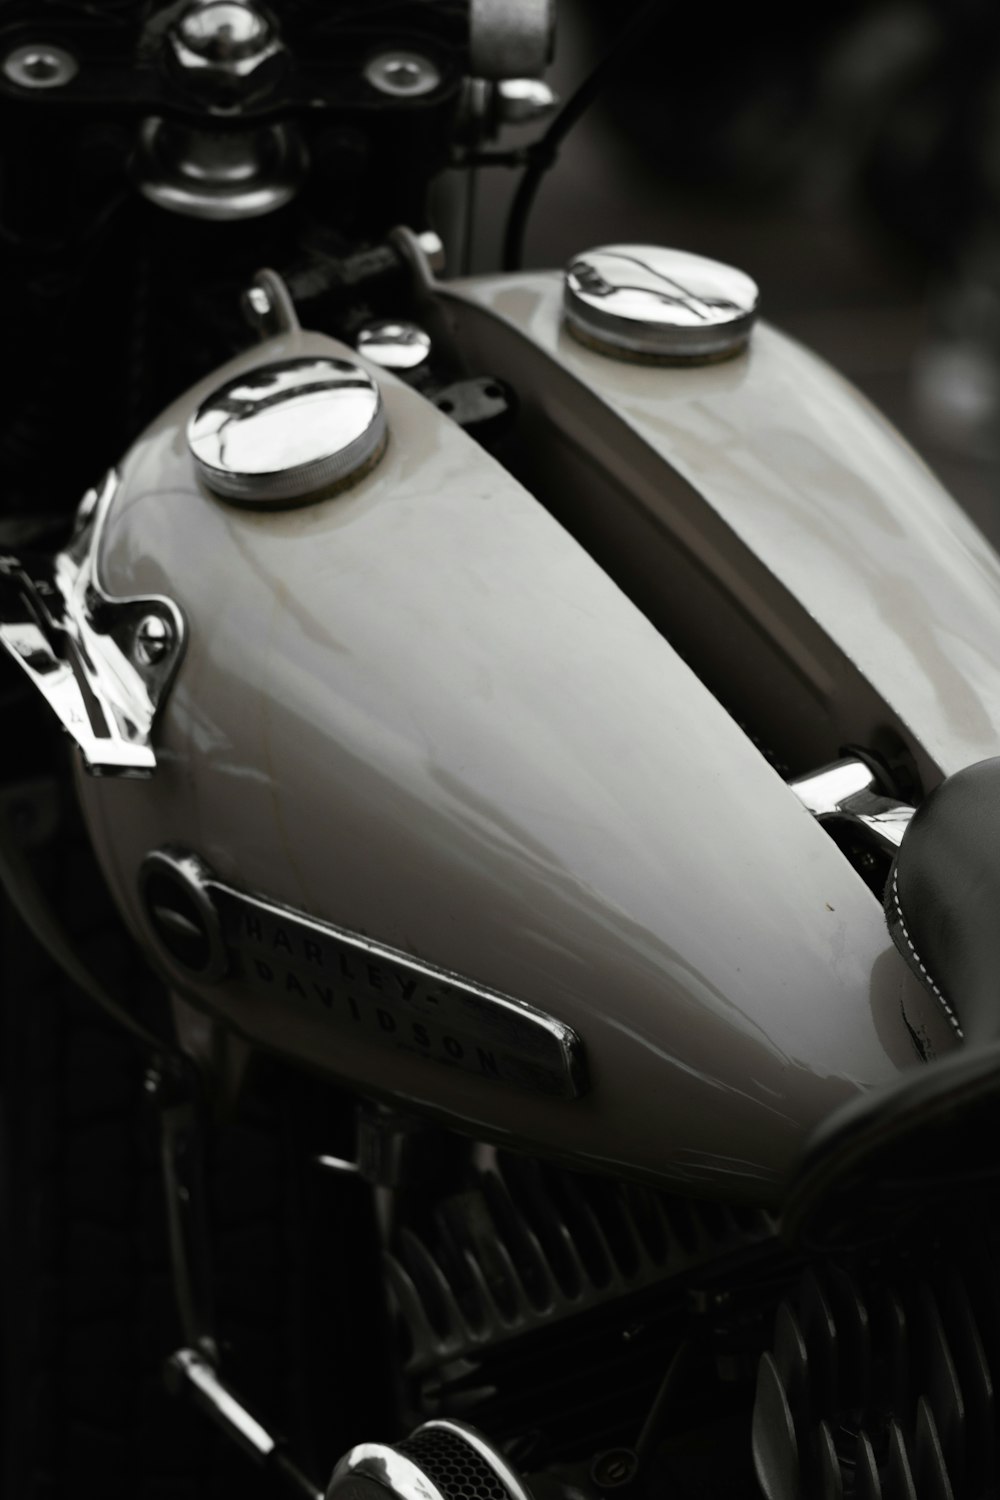 a close-up of a motorcycle